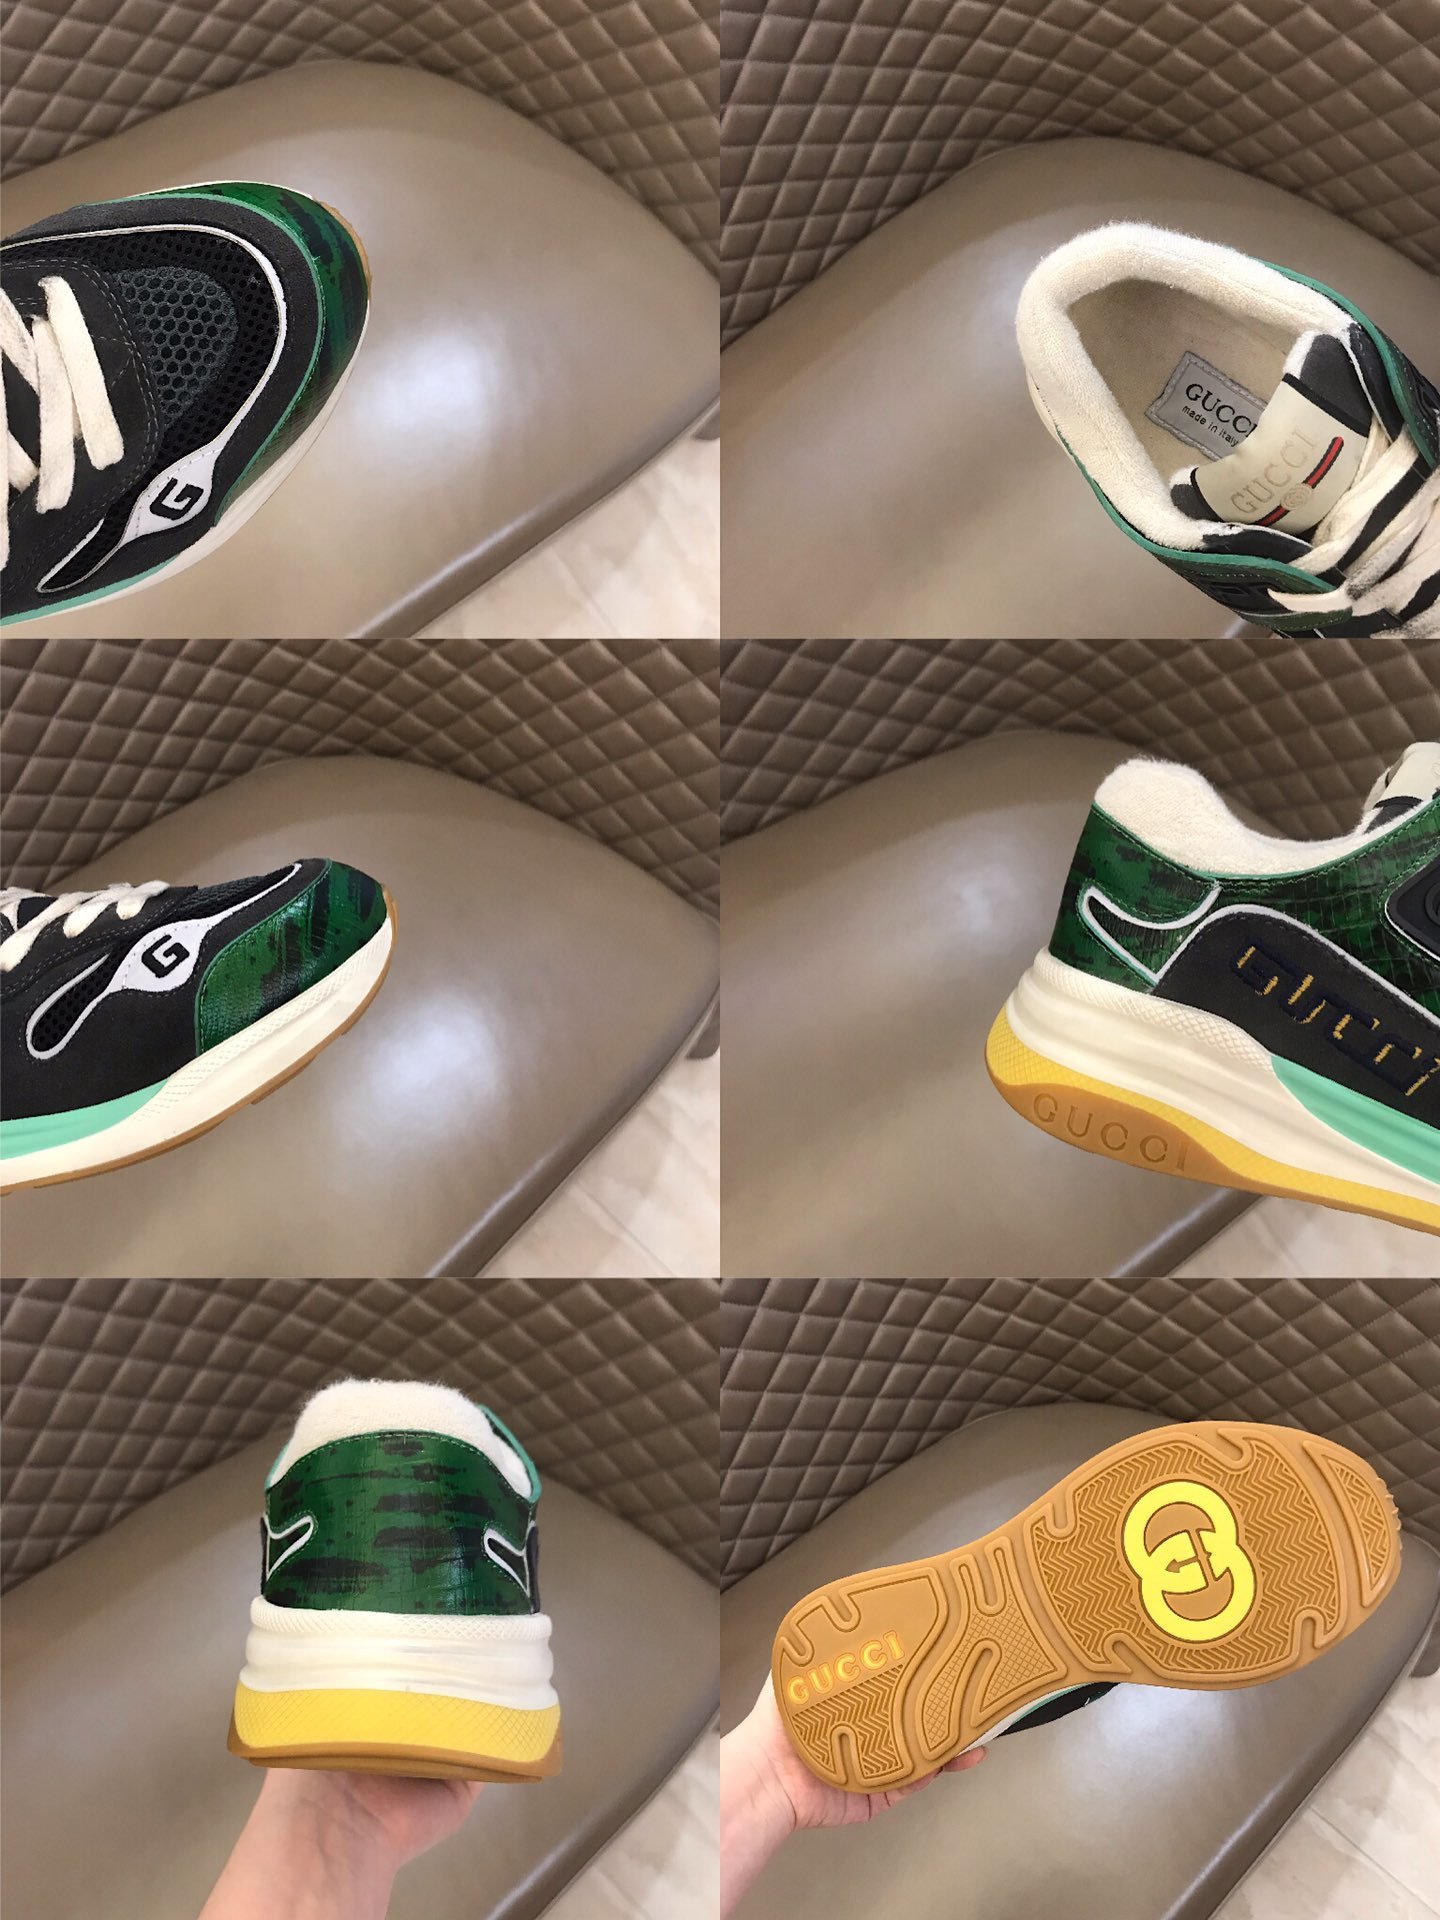 Gucci High Quality Sneakers Black and green suede and white sole MS021176